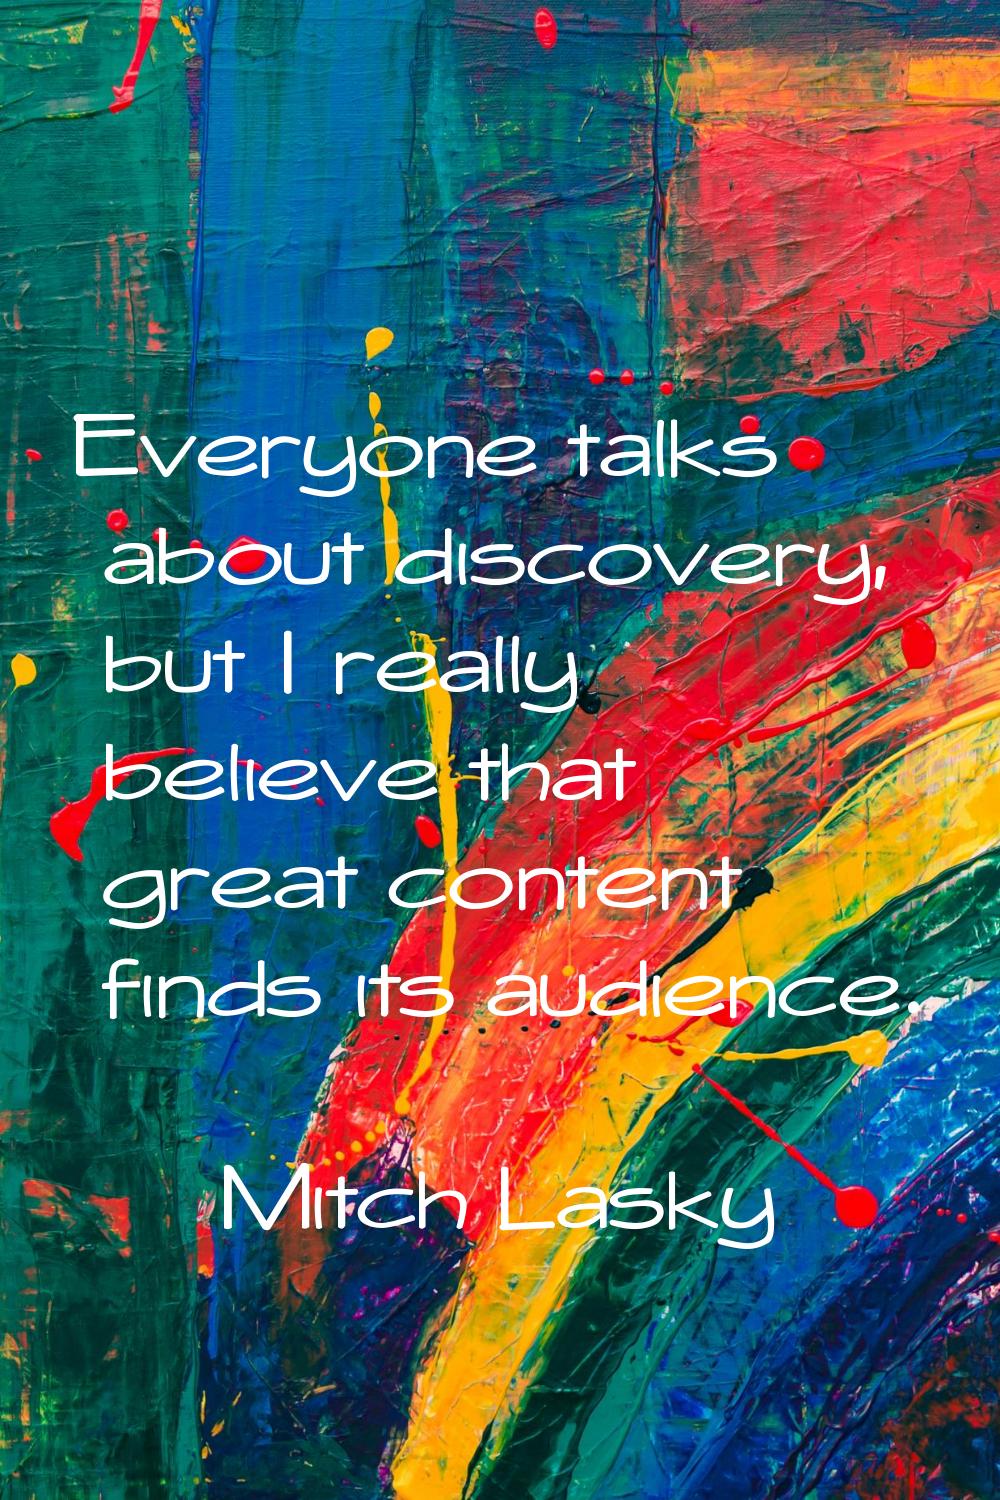 Everyone talks about discovery, but I really believe that great content finds its audience.